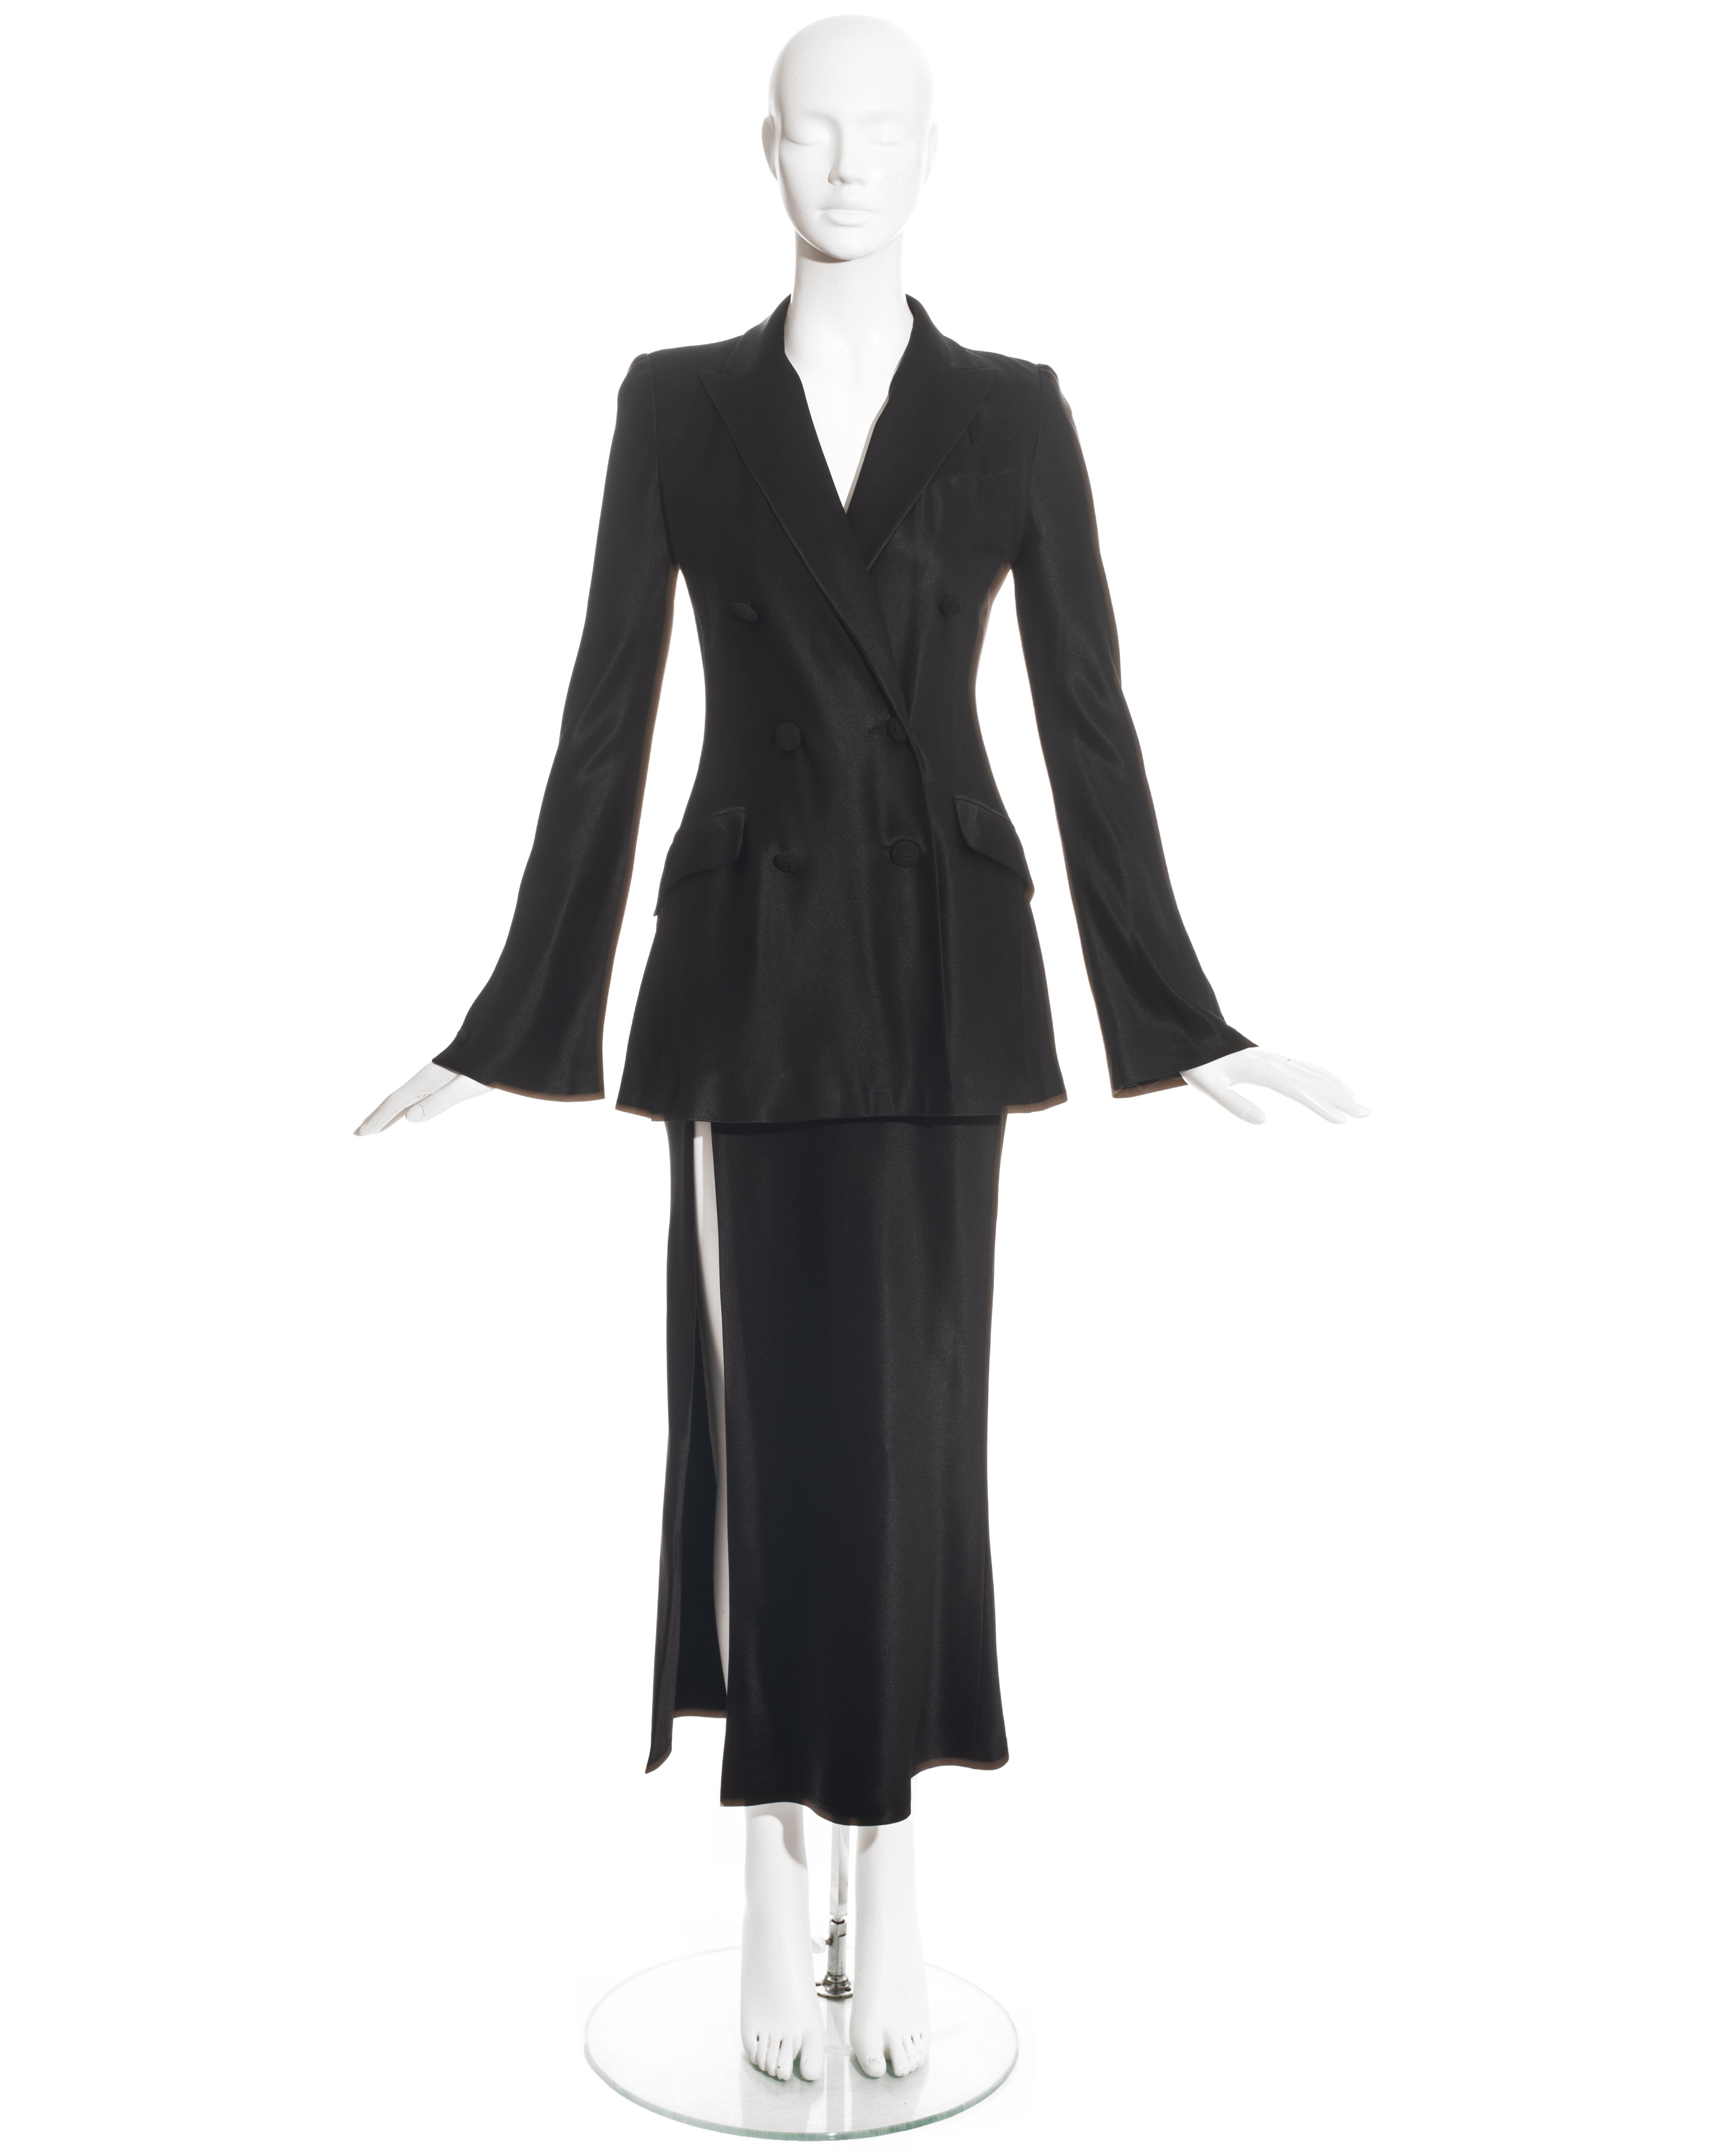 John Galliano black satin skirt suit comprising: double-breasted jacket with cord-wrapped buttons and peak lapel; high waisted ankle-length skirt with high leg slit and cream silk lining. 

Fall-Winter 1994